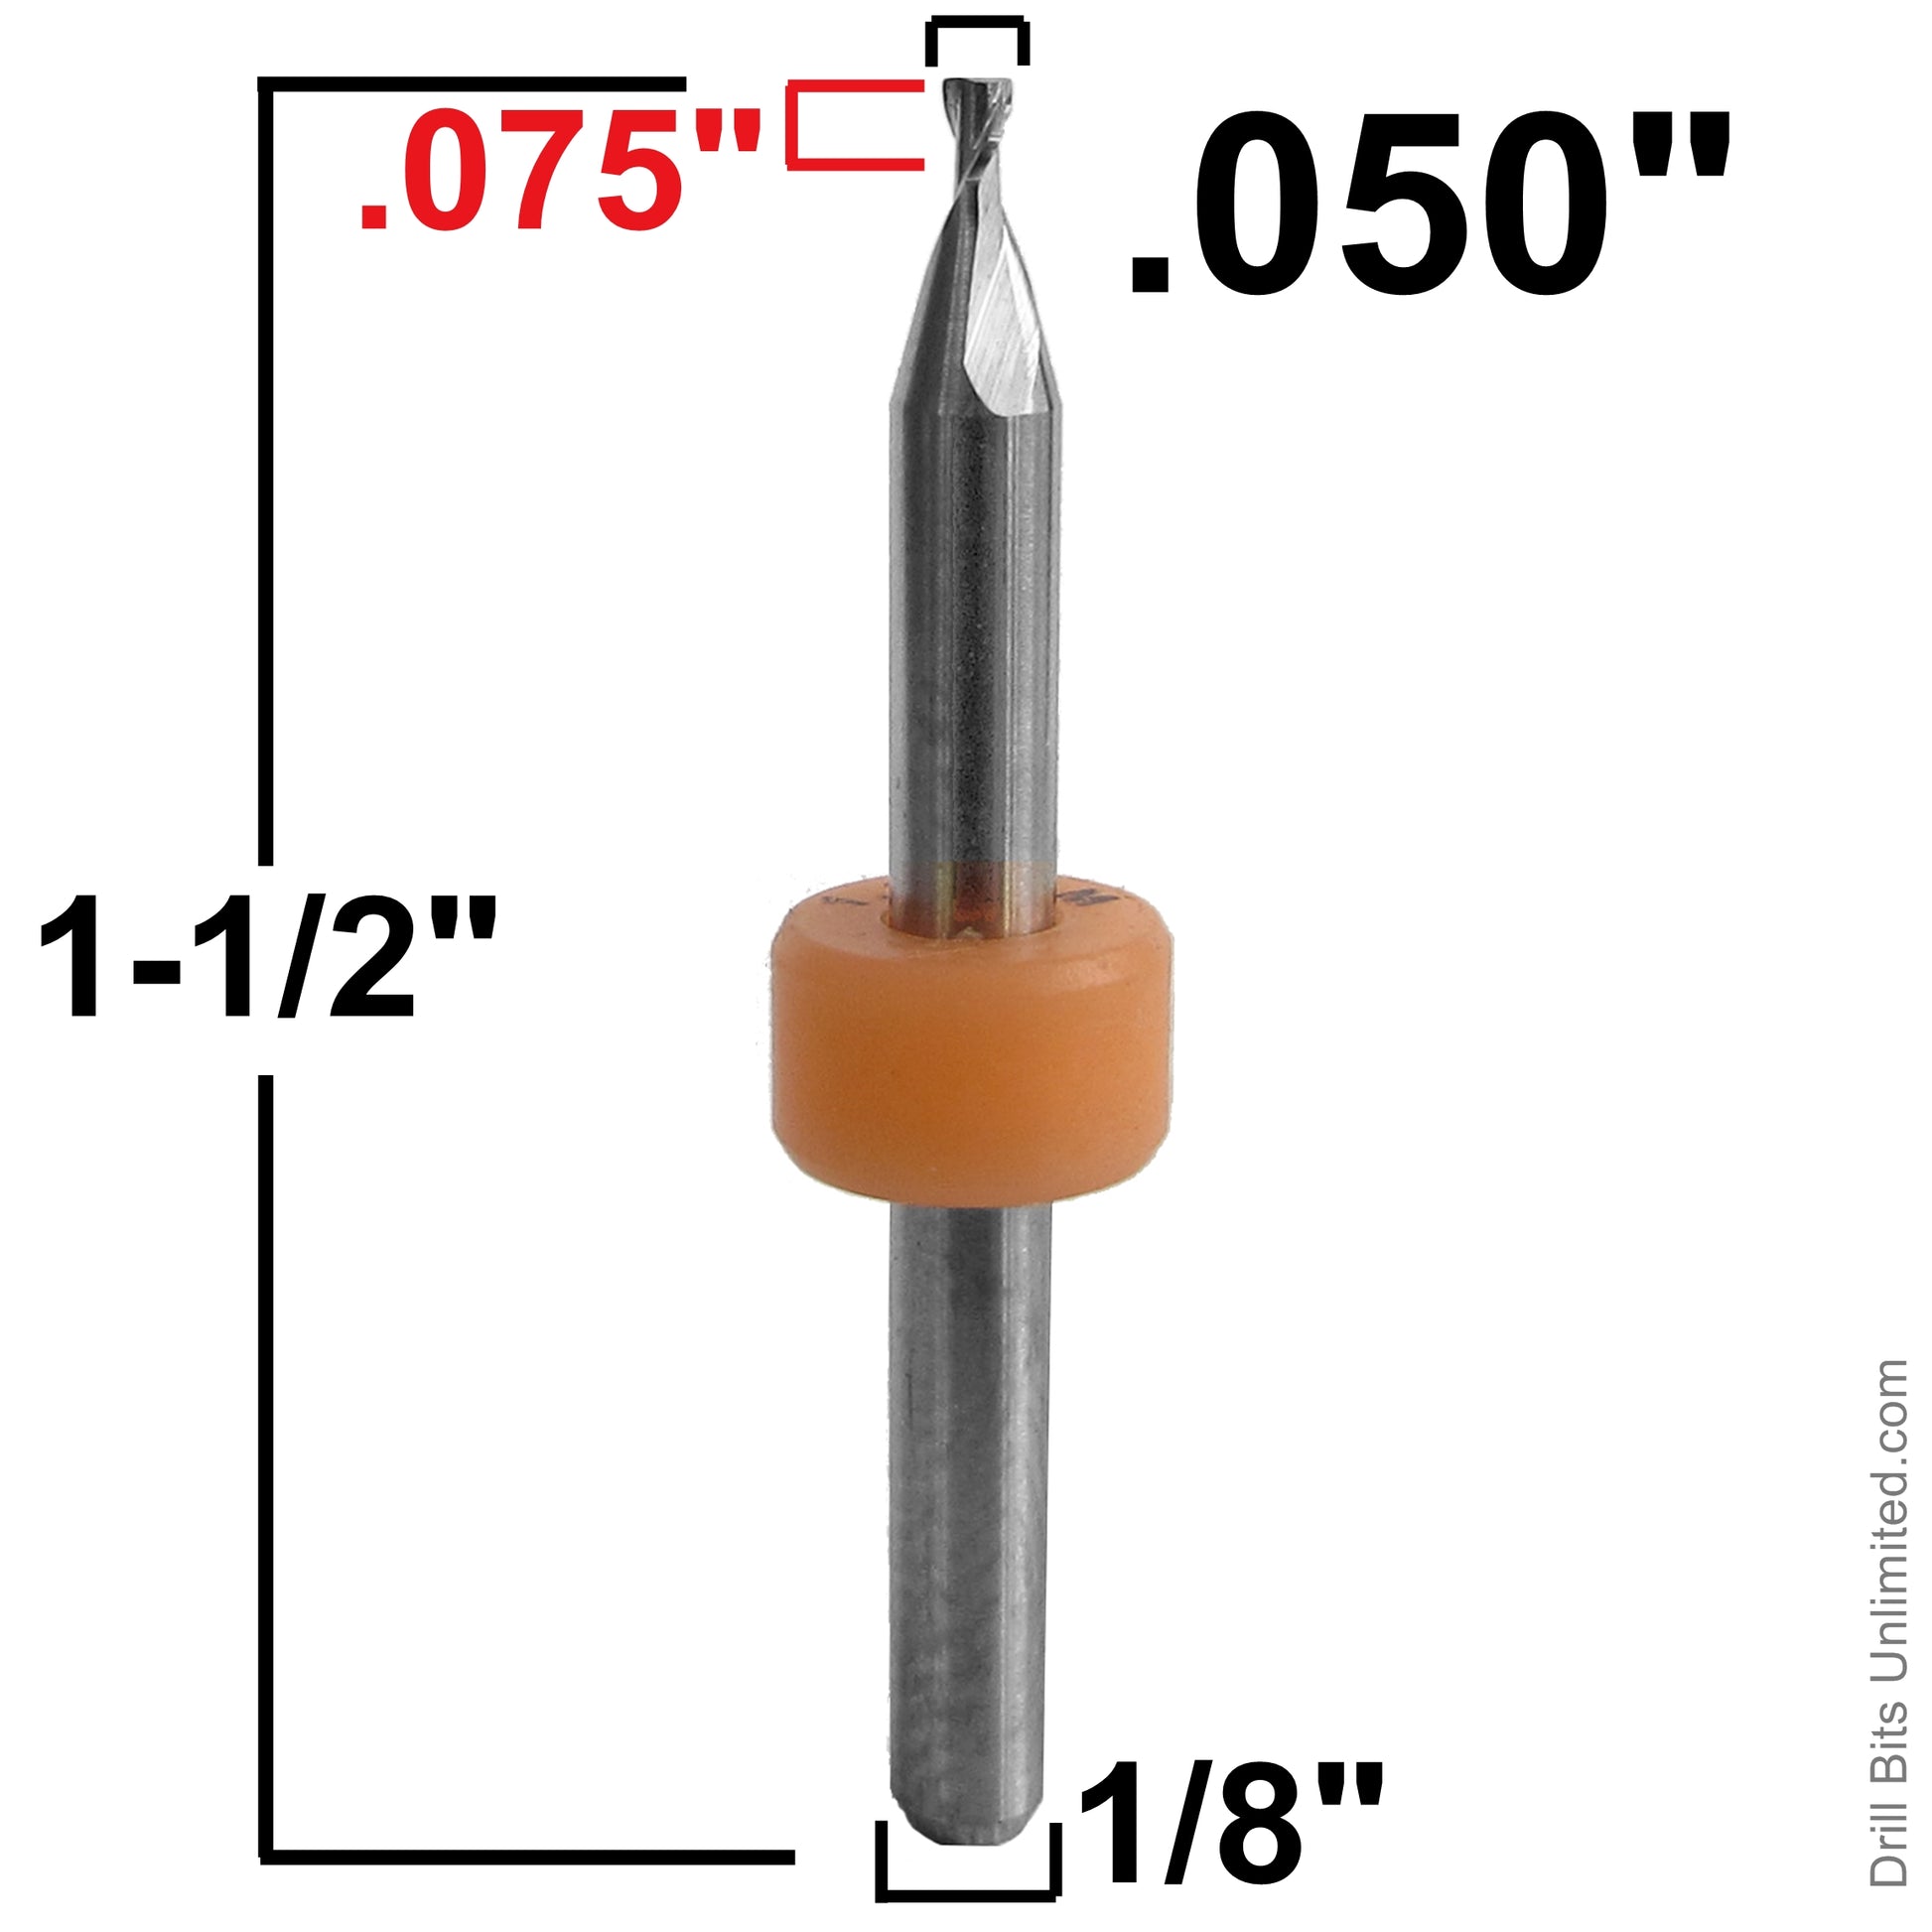 .050" two flute end mill stub length